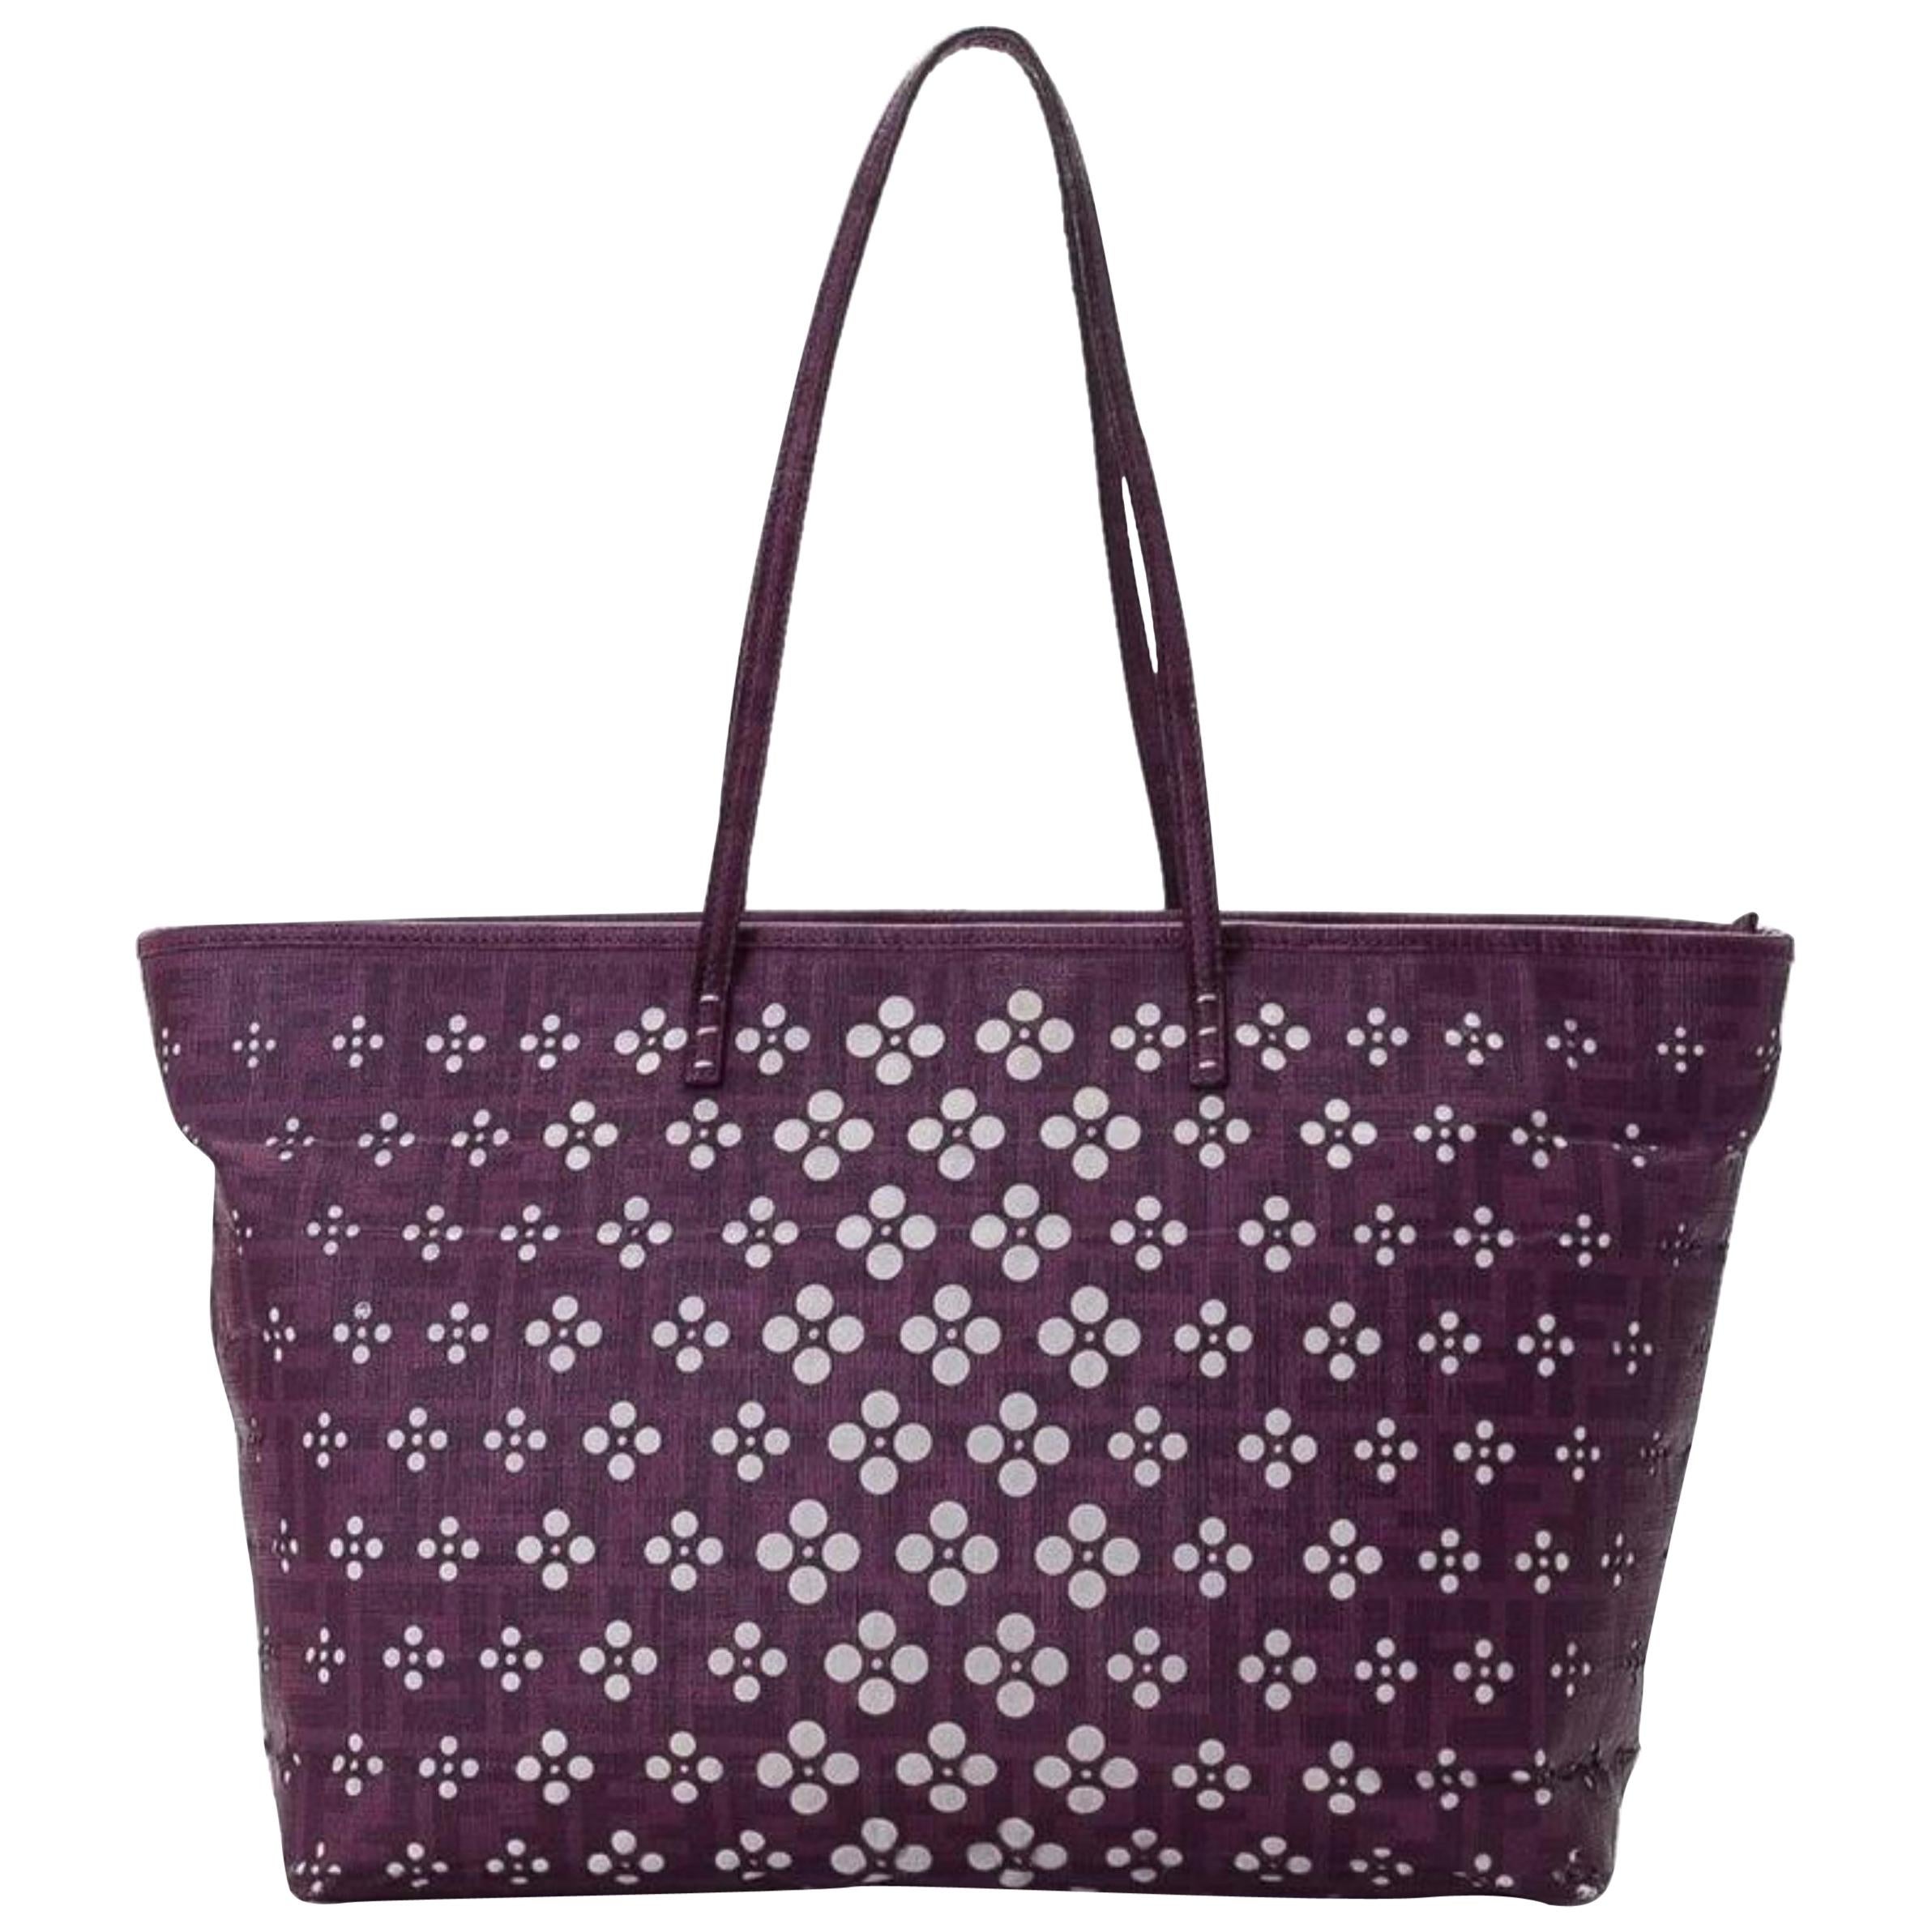 Fendi Perforated Laser Cut Out Tote 228077 Purple Coated Canvas Shoulder Bag For Sale